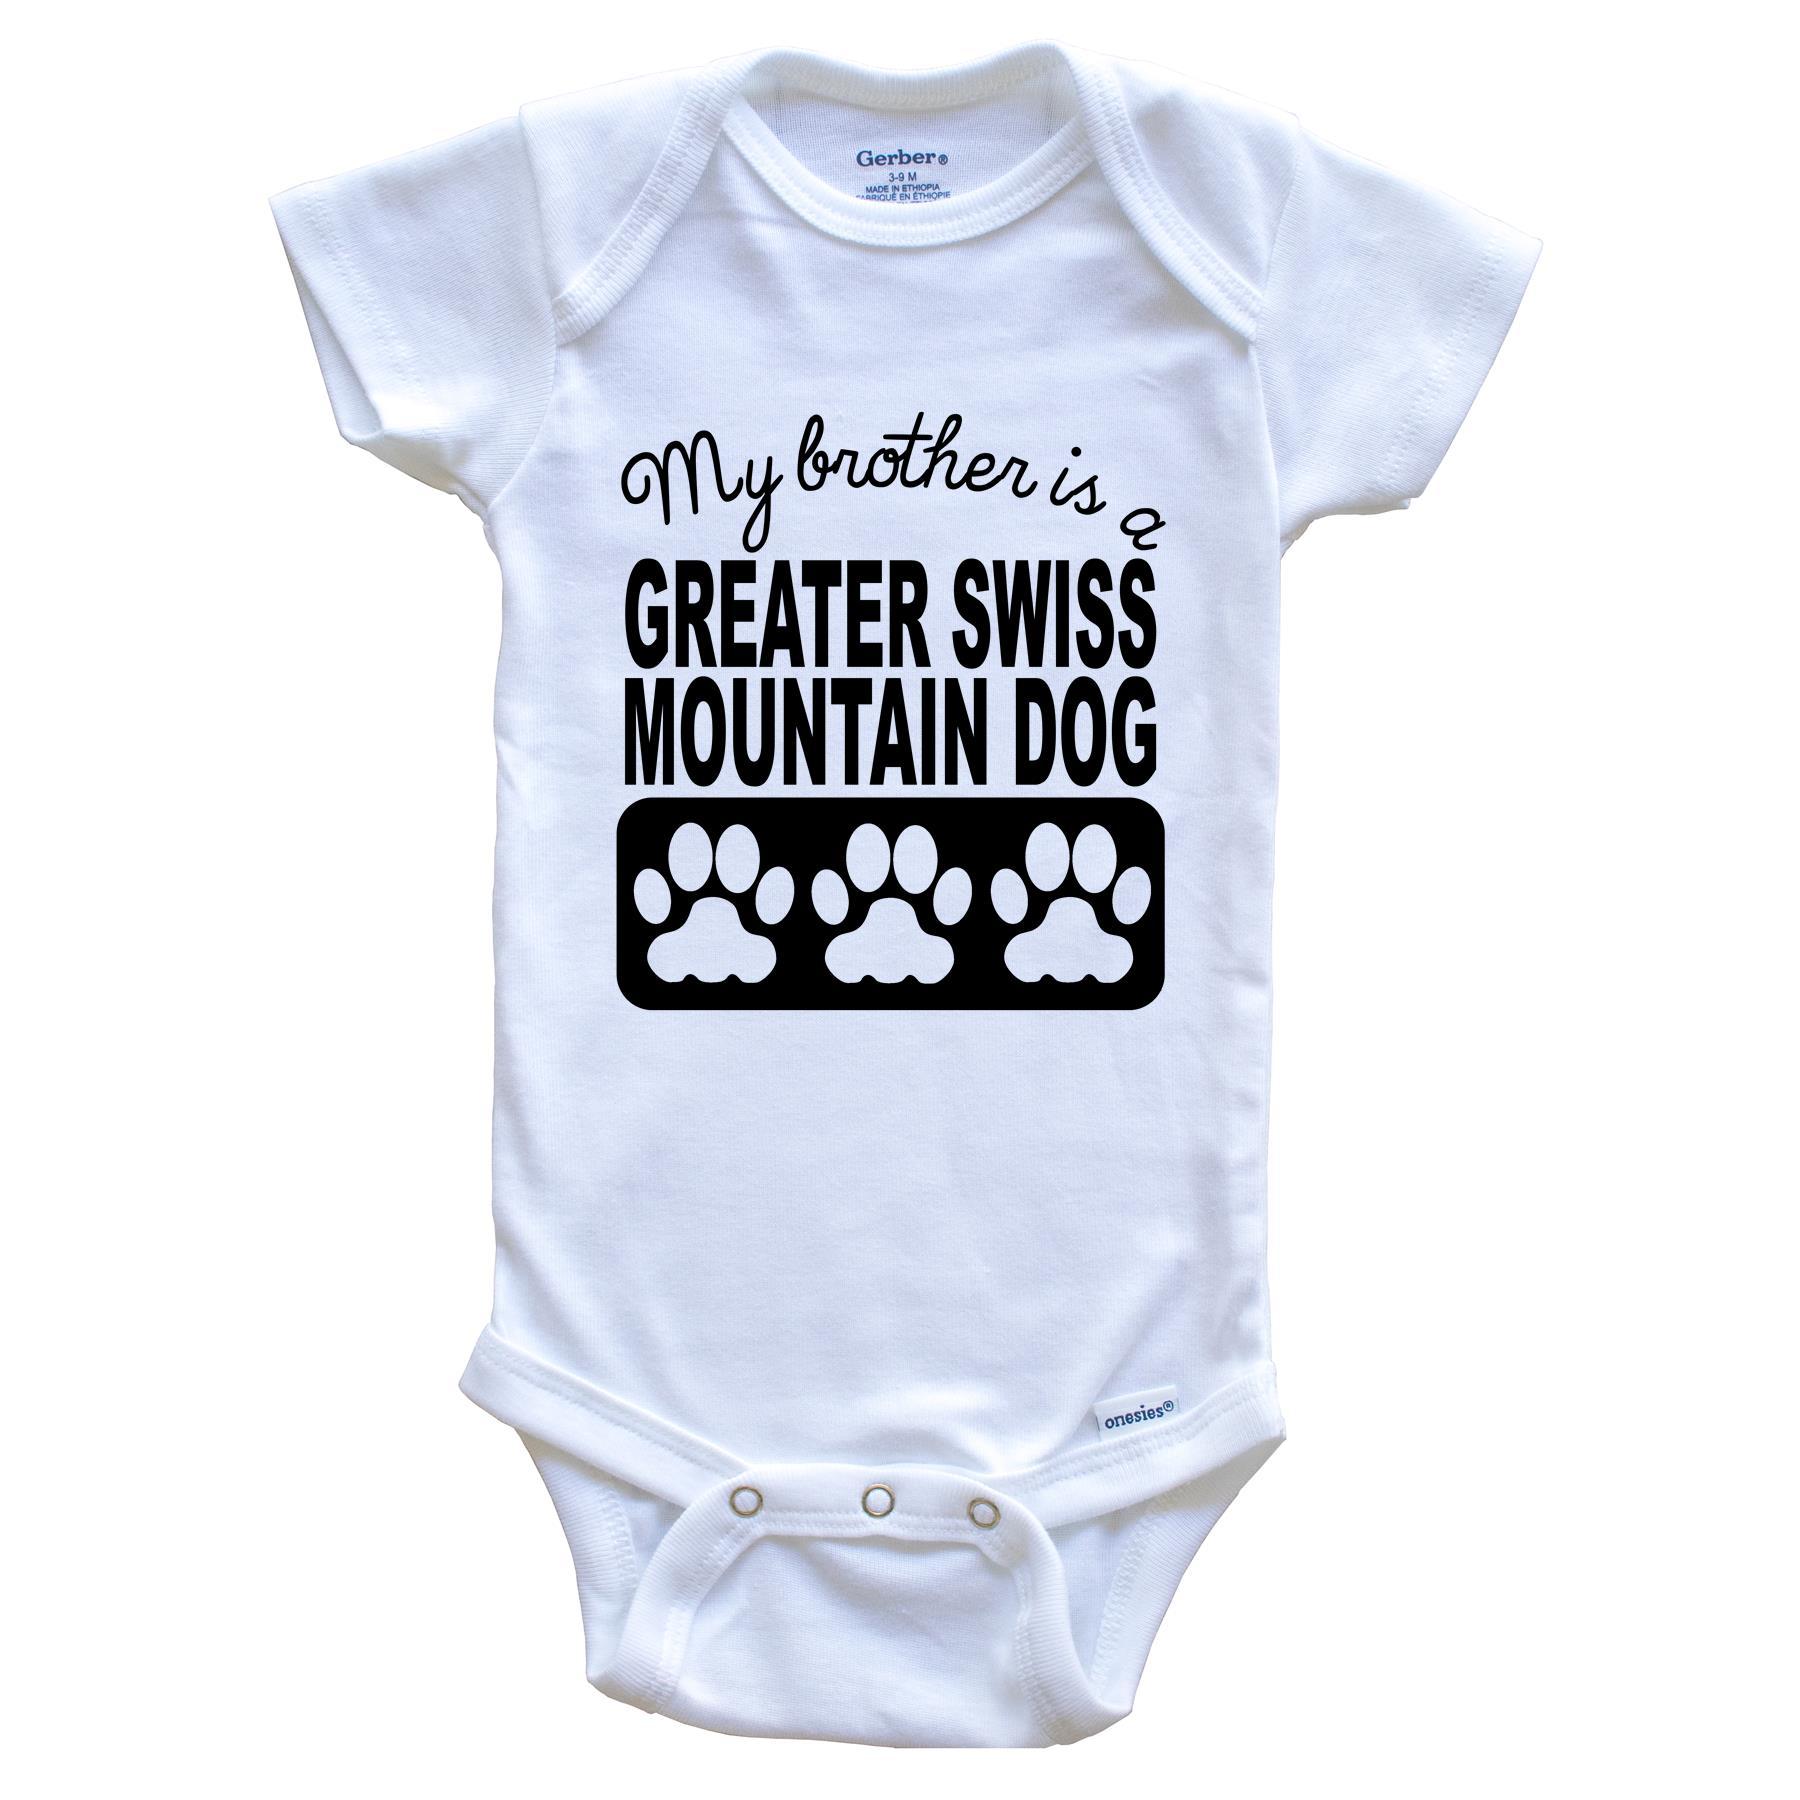 My Brother Is A Greater Swiss Mountain Dog Baby Onesie